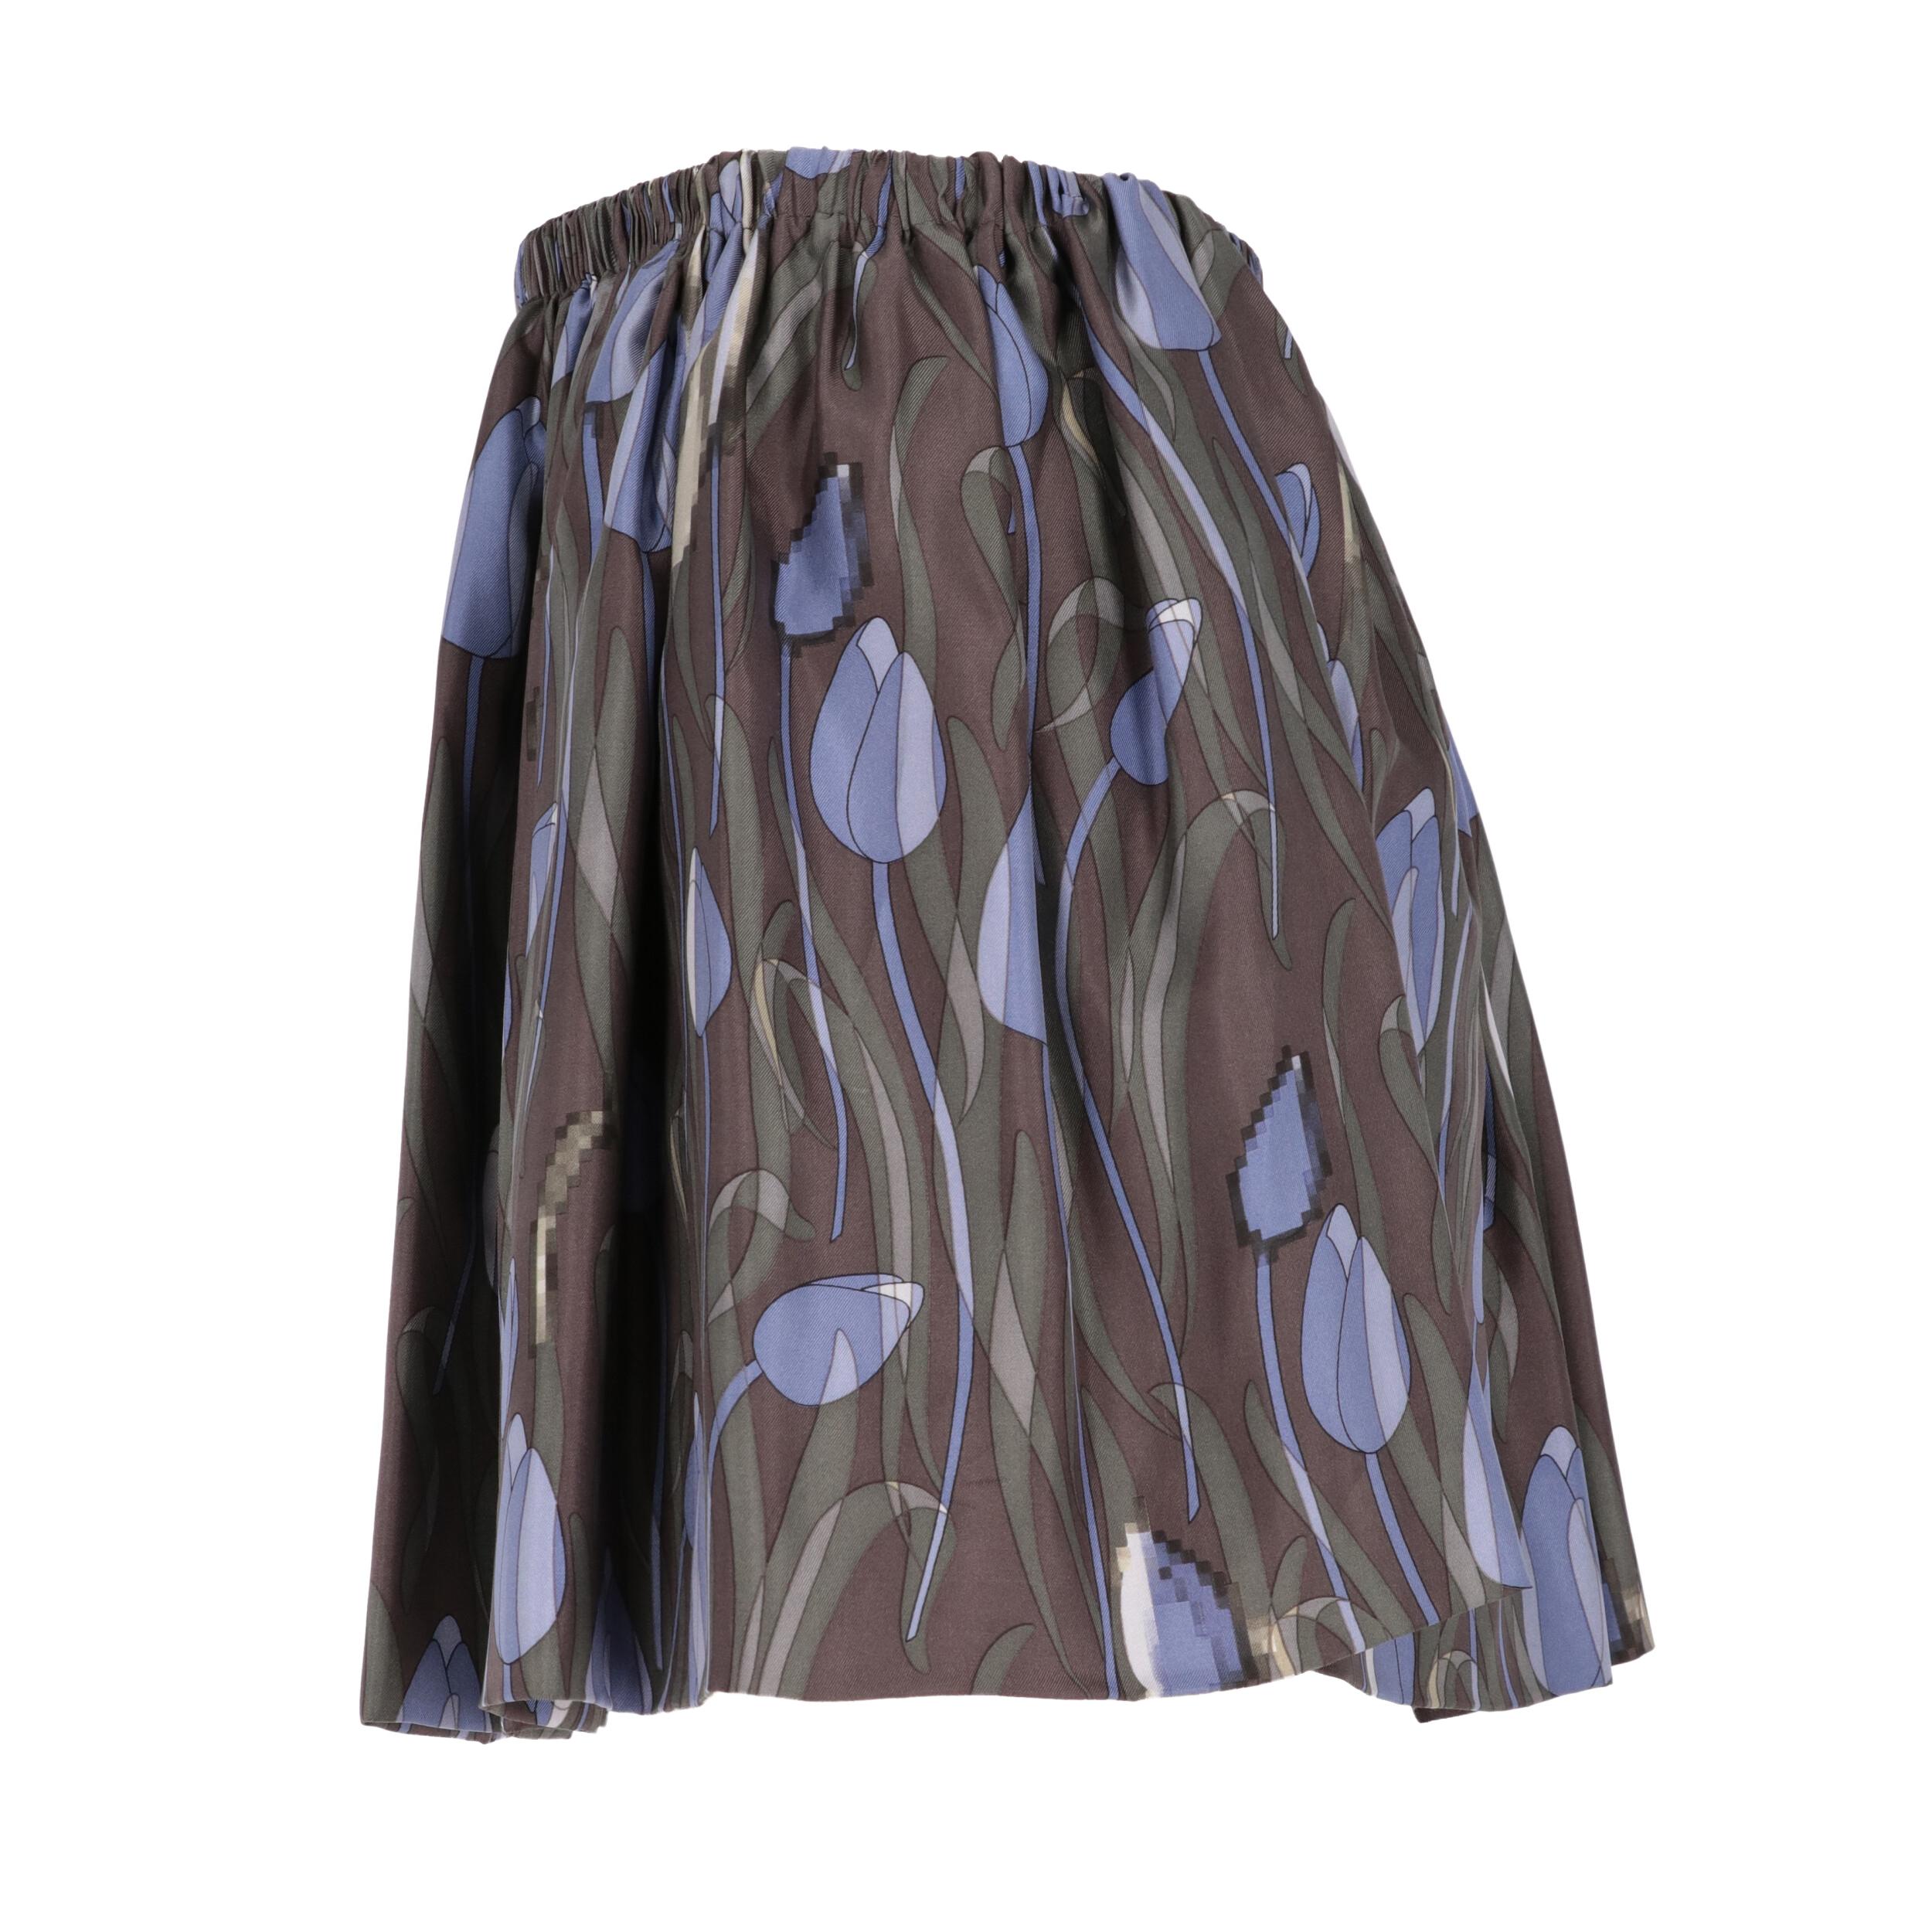 Miu Miu silk mini skirt with floral pattern and pixel details. Gathered stretchy waistband.

Years: 2000’s
Made in Italy
Size: 42 IT

Flat measurements:

Height: 39 cm
Waist: 33 cm